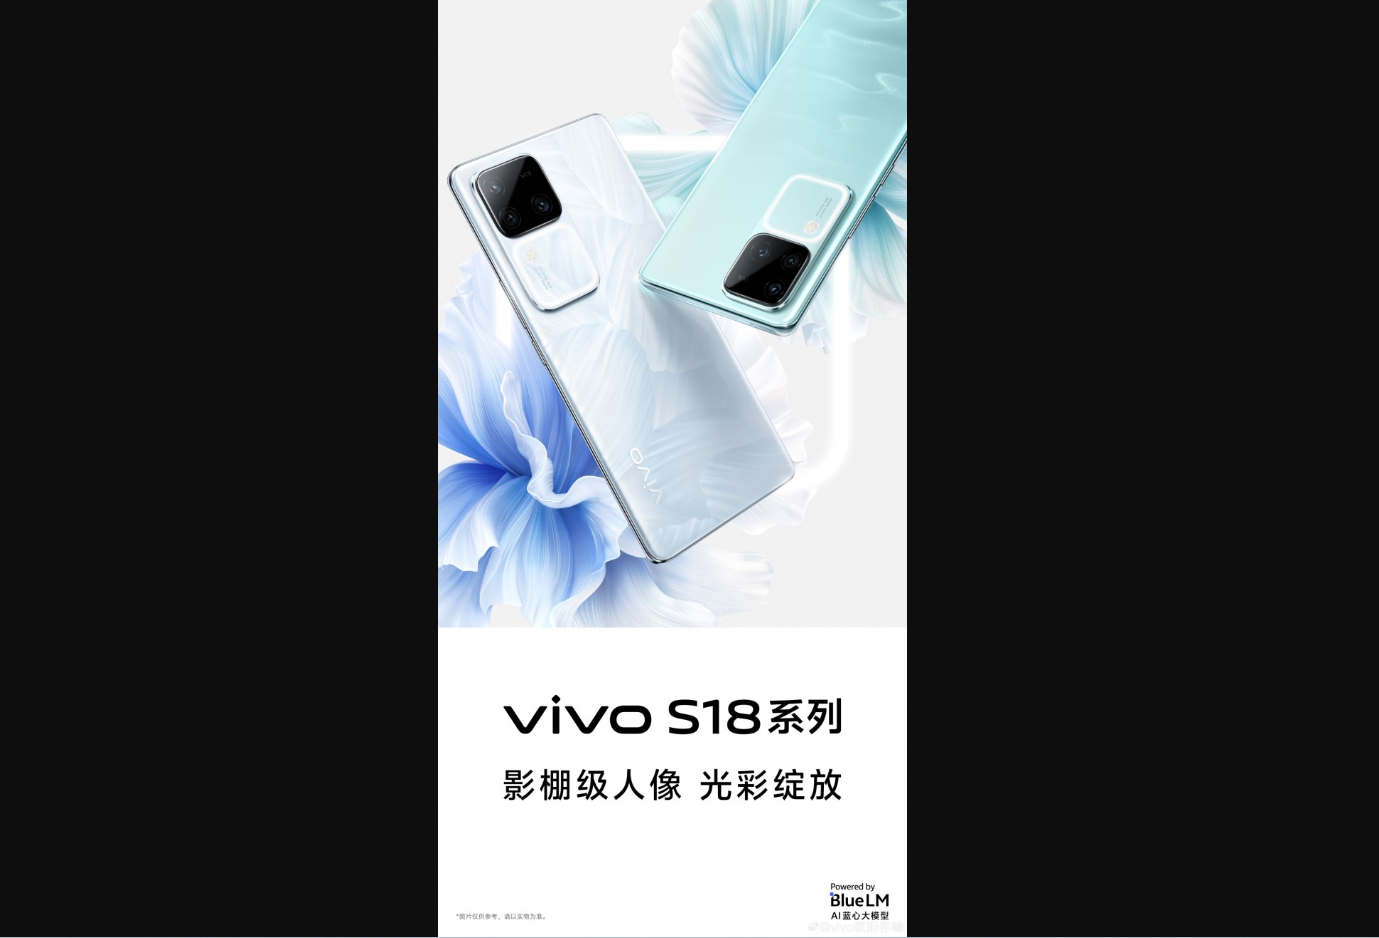 Vivo S18 and S18 Pro: Expected Specs